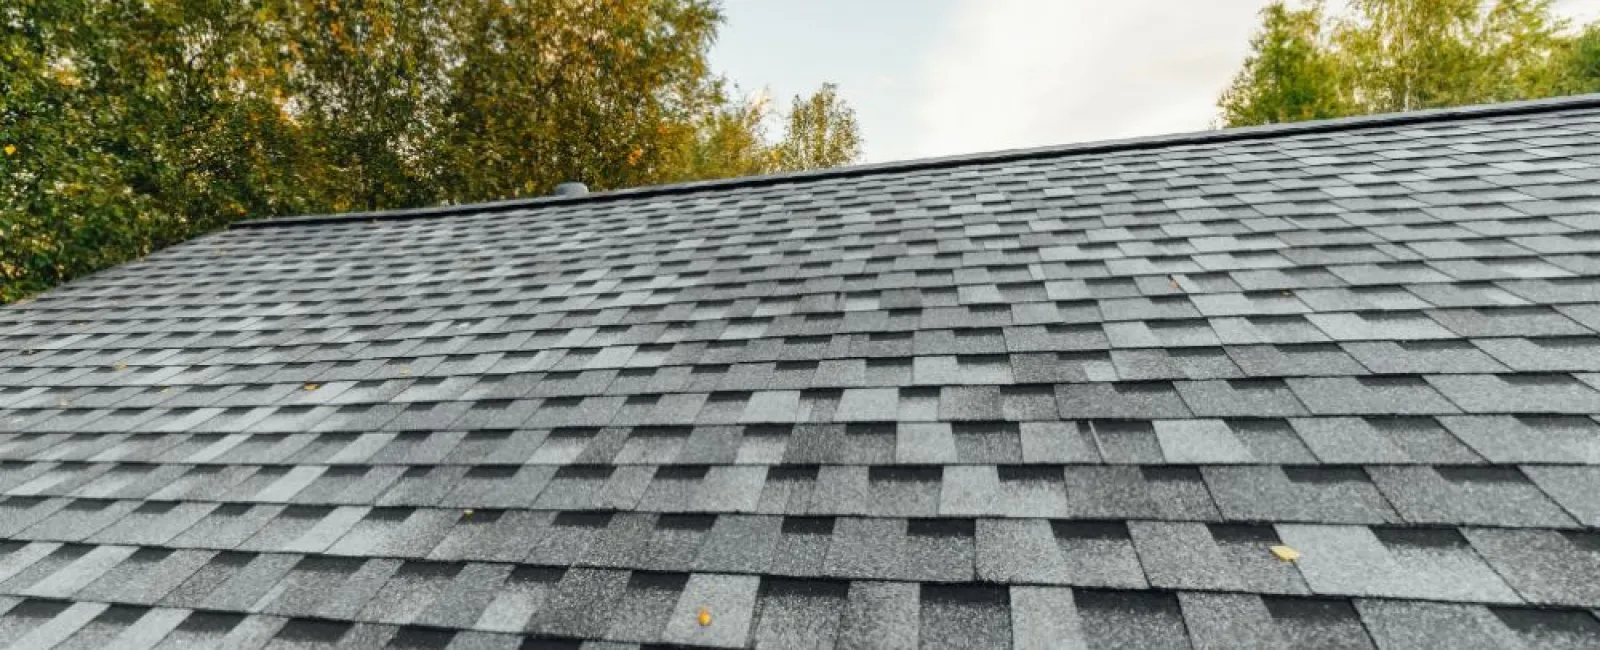 What’s the Best Roofing Material for Your Home?